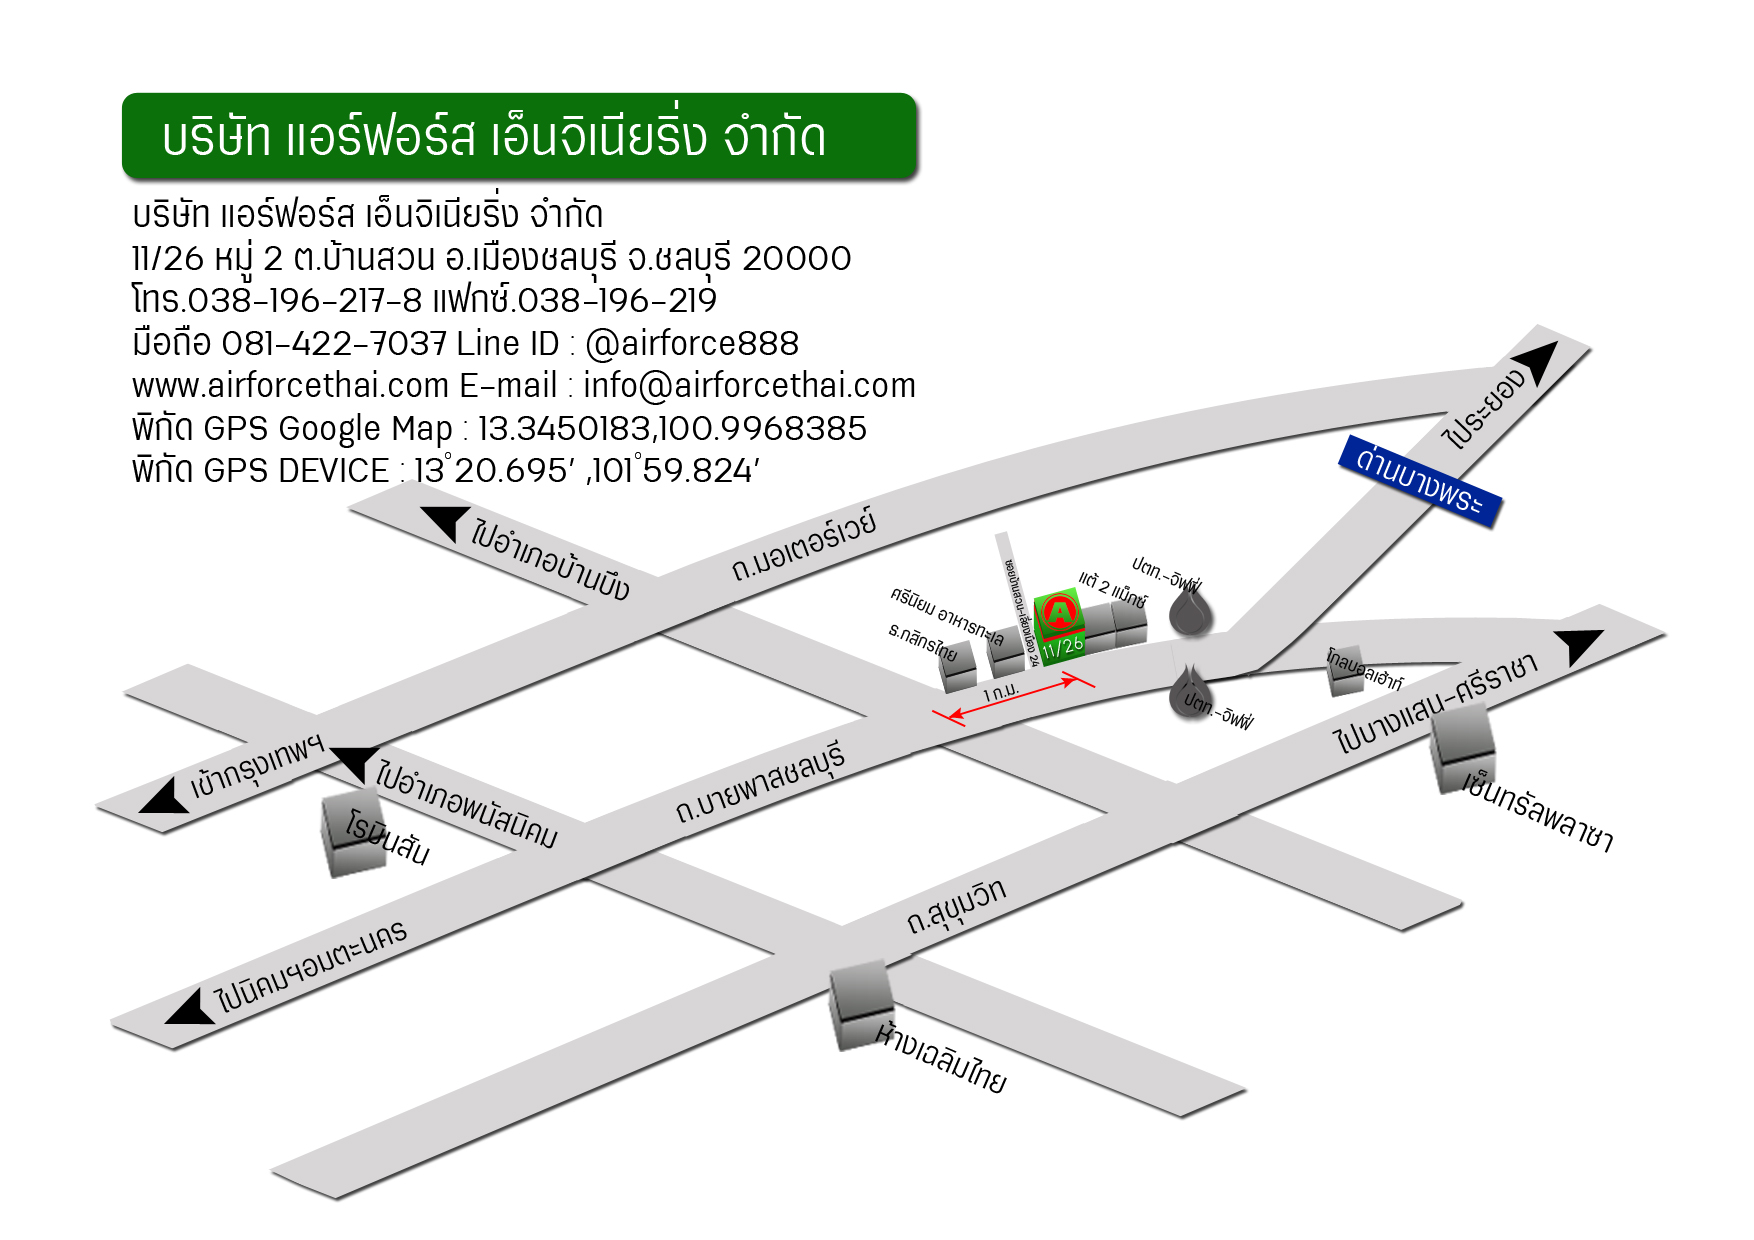 Airforce's Map | airforcethai